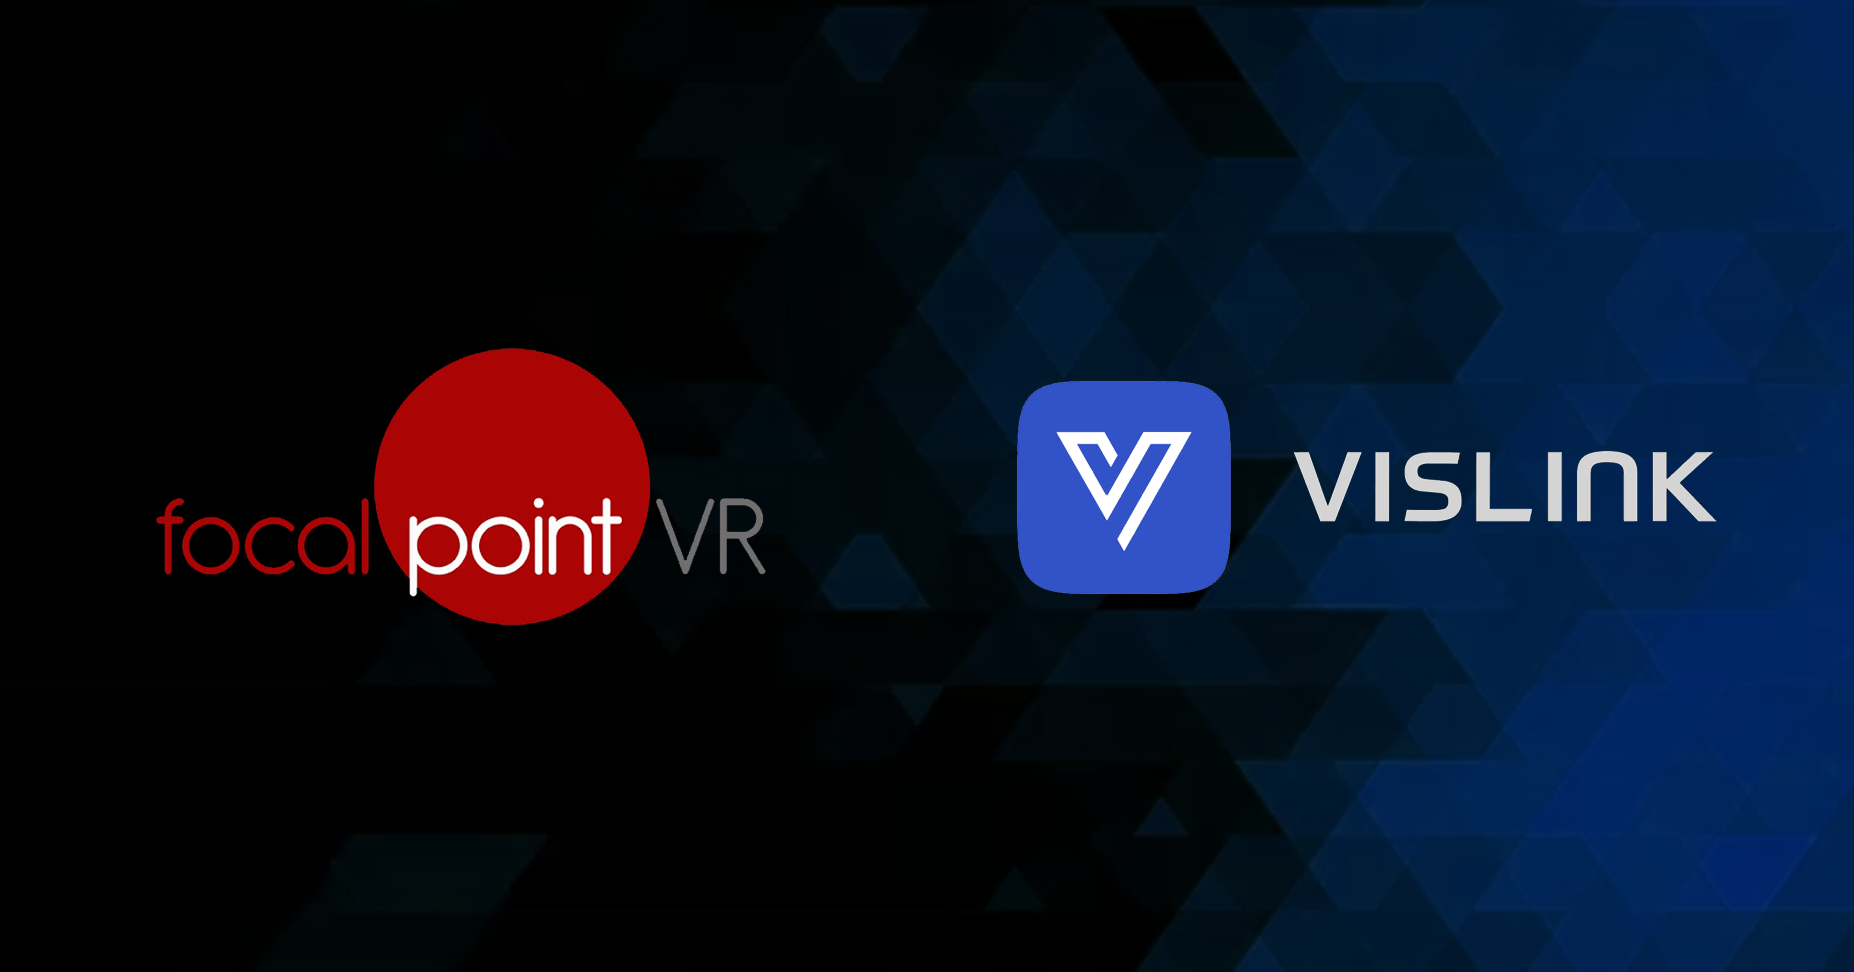 Vislink and Focal Point VR Join Forces to Revolutionize Live Event Broadcasting with Immersive Video